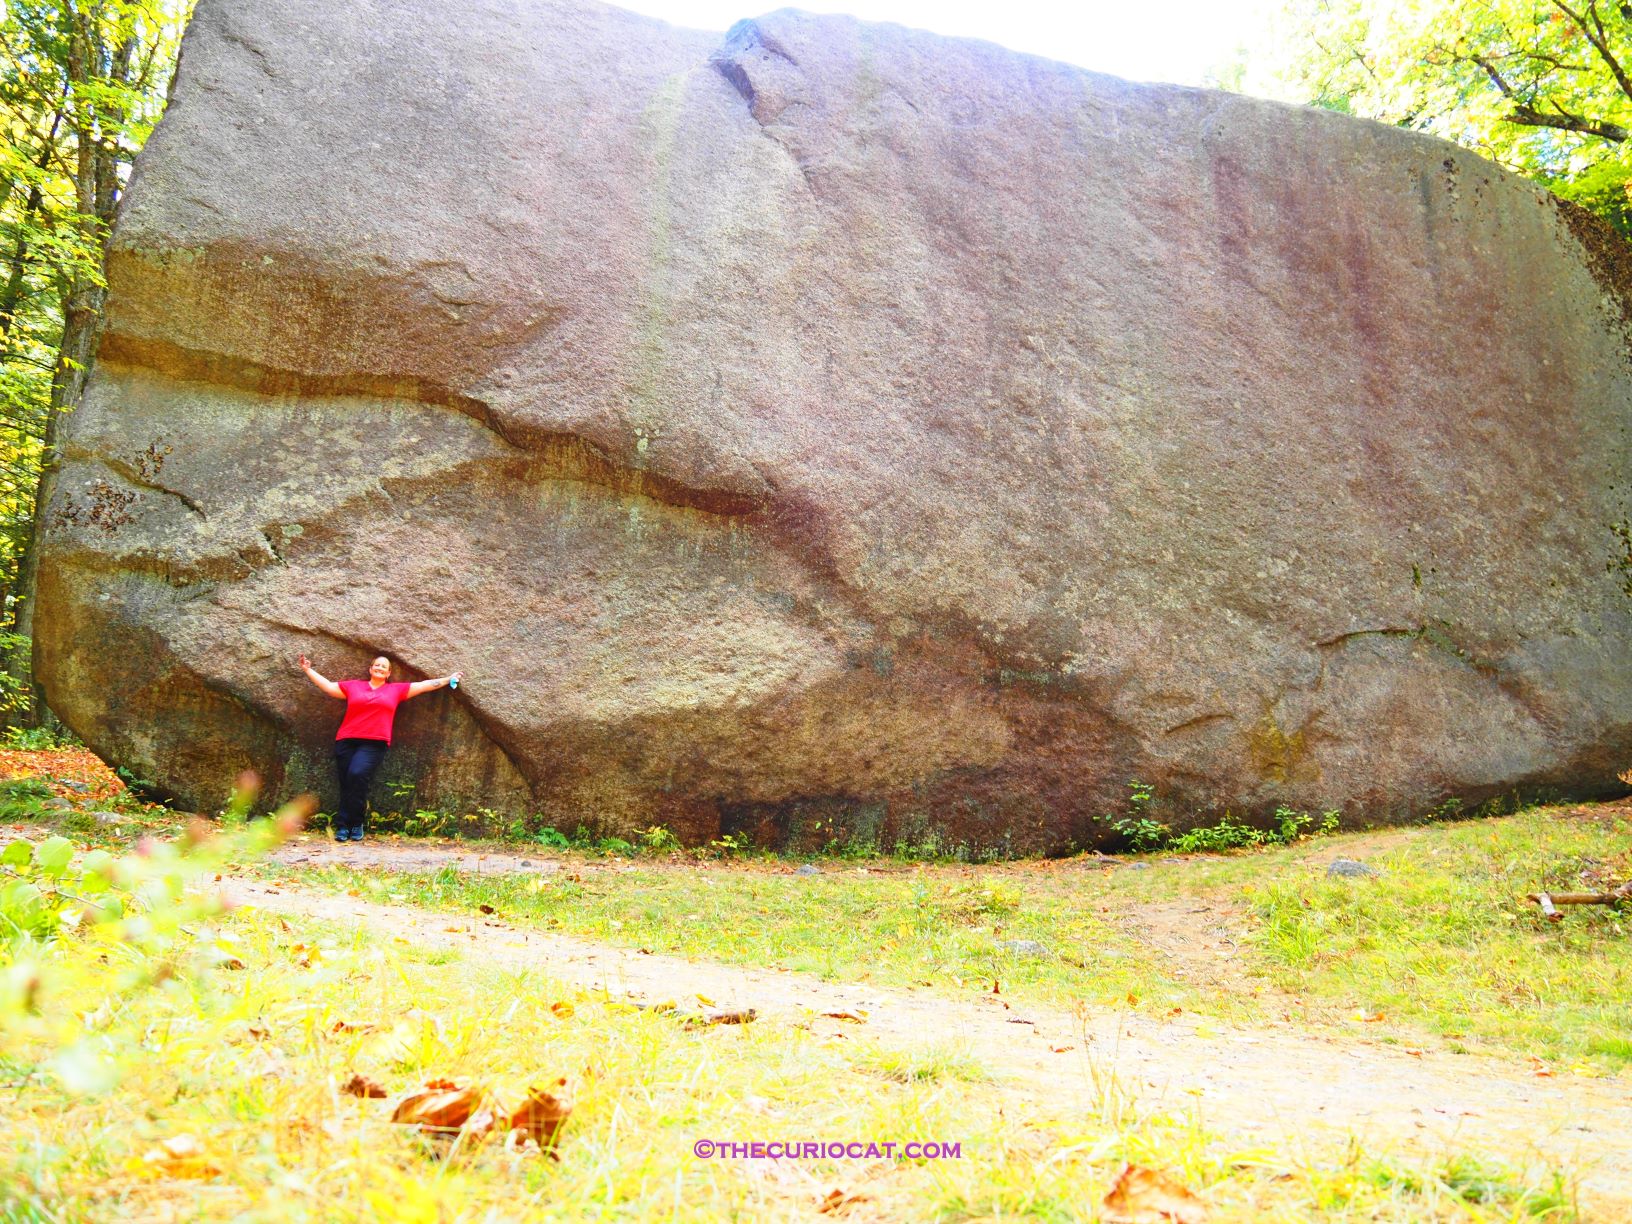 Madison Boulder, human for scale